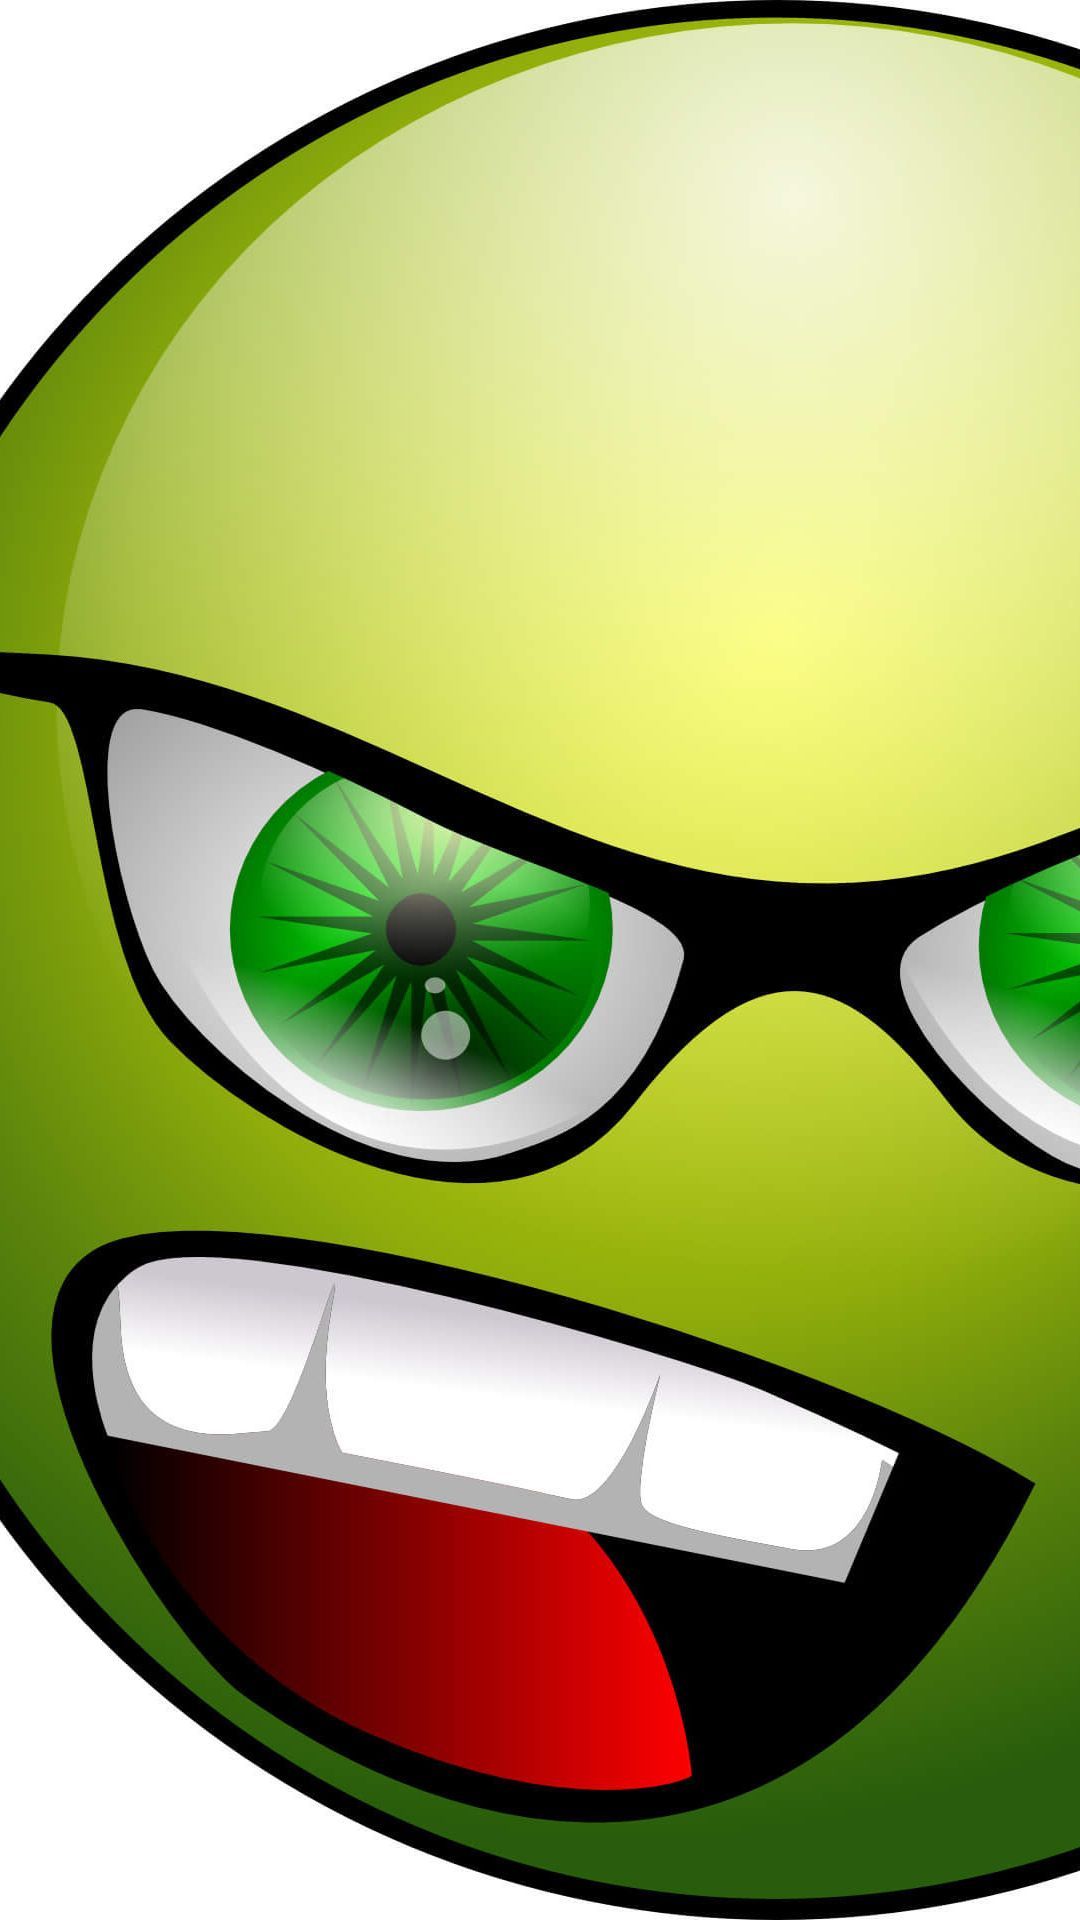 Green Angry Face Wallpaper